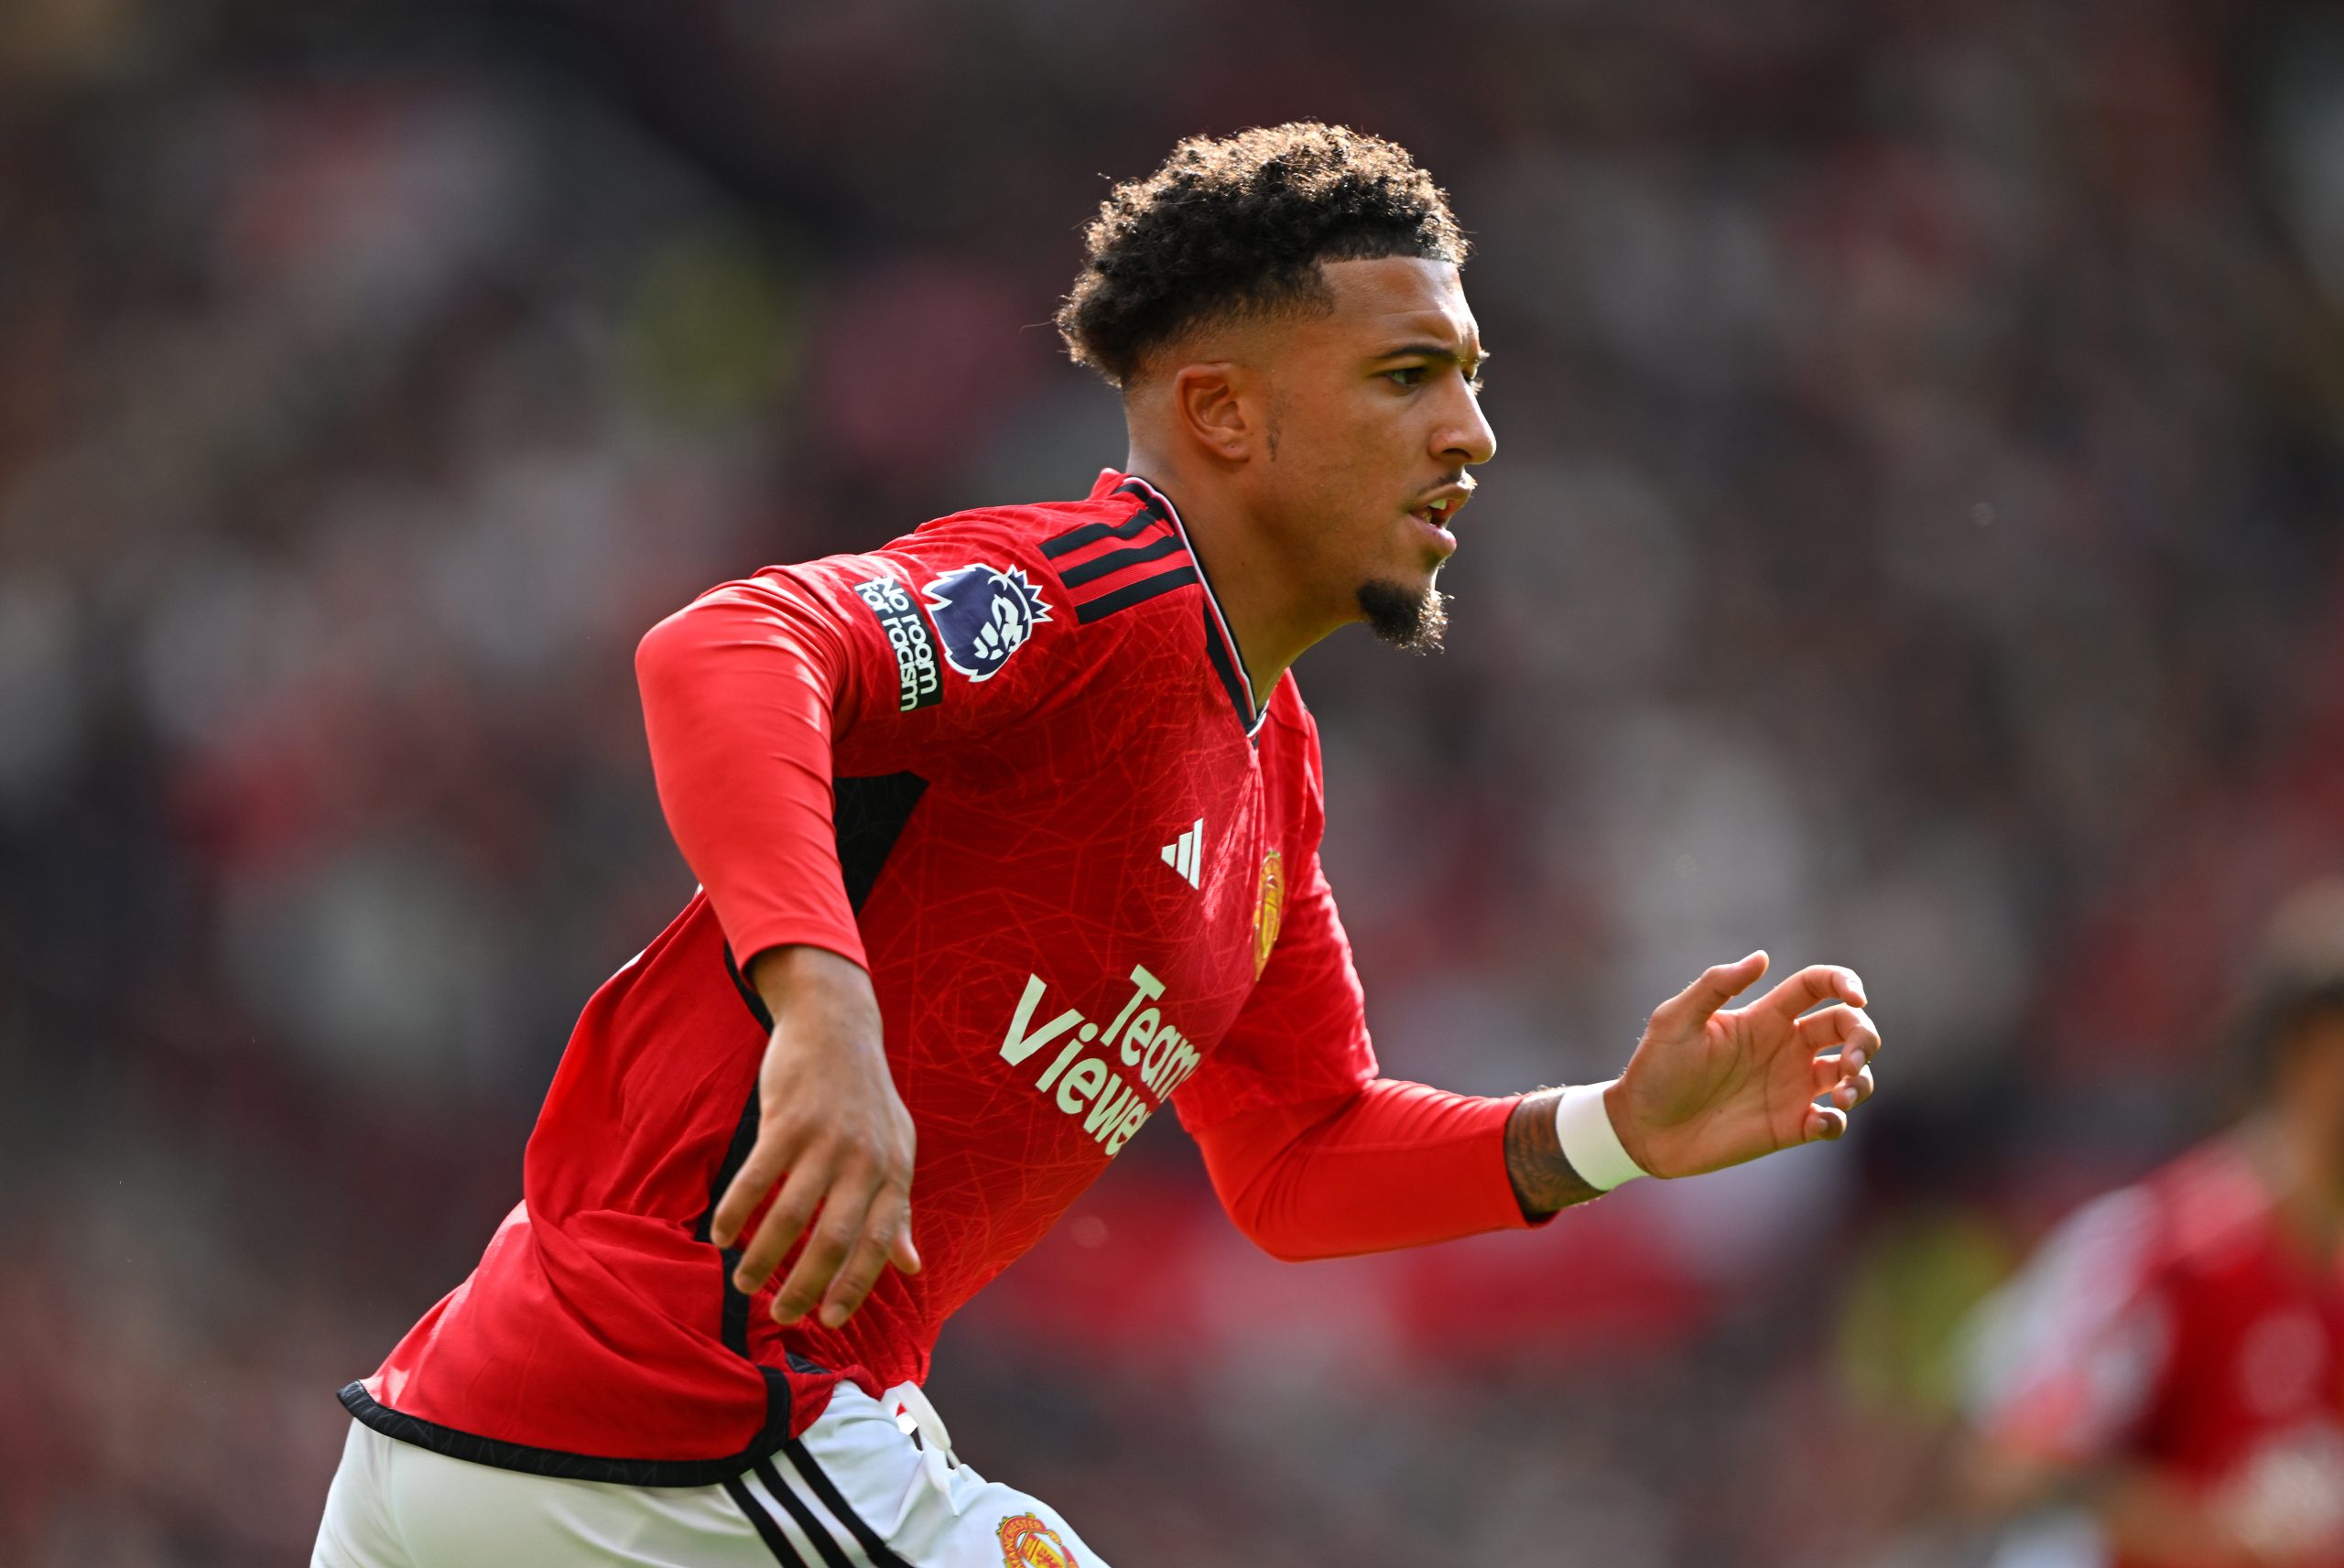 MANCHESTER, ENGLAND - AUGUST 26: Manchester United player Jadon Sancho in action during the Premier League match between Manchester United and Nottingham Forest at Old Trafford on August 26, 2023 in Manchester, England. (Photo by Stu Forster/Getty Images)